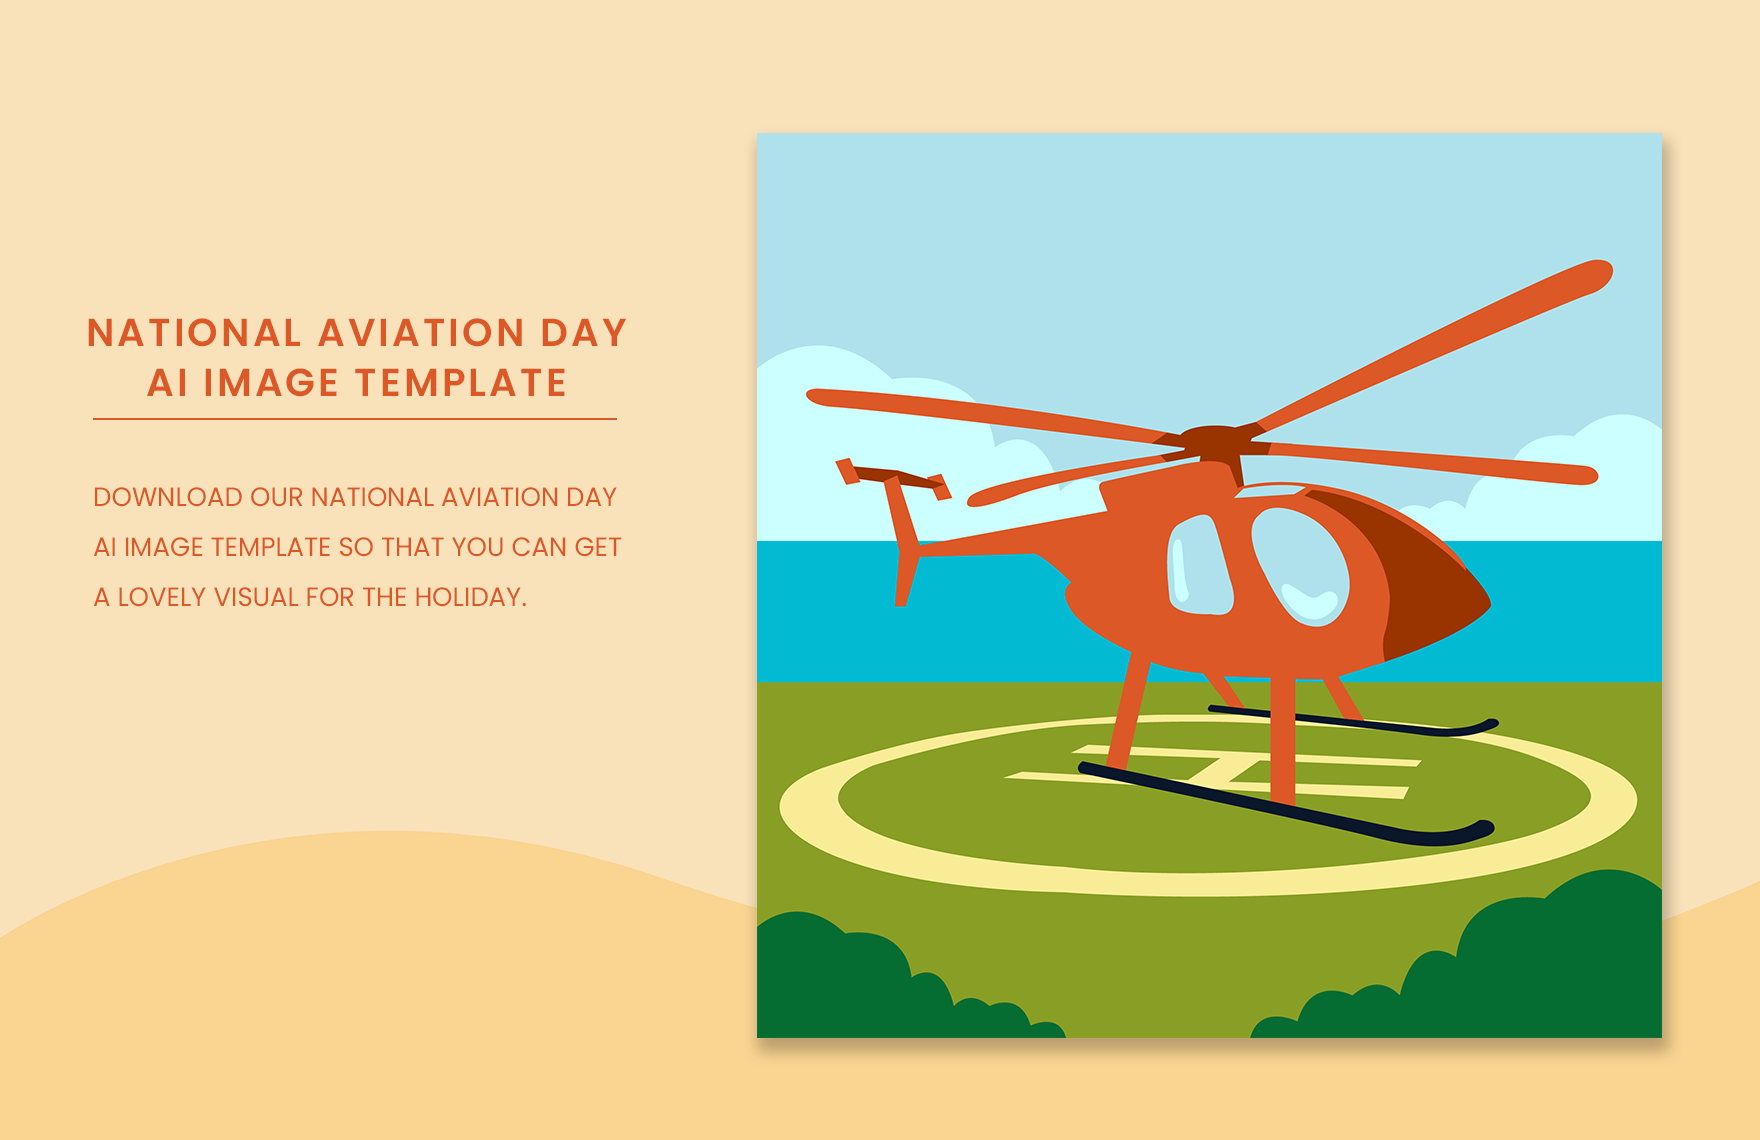 Free National Aviation Day AI Image Template in PDF, Illustrator, SVG, PNG